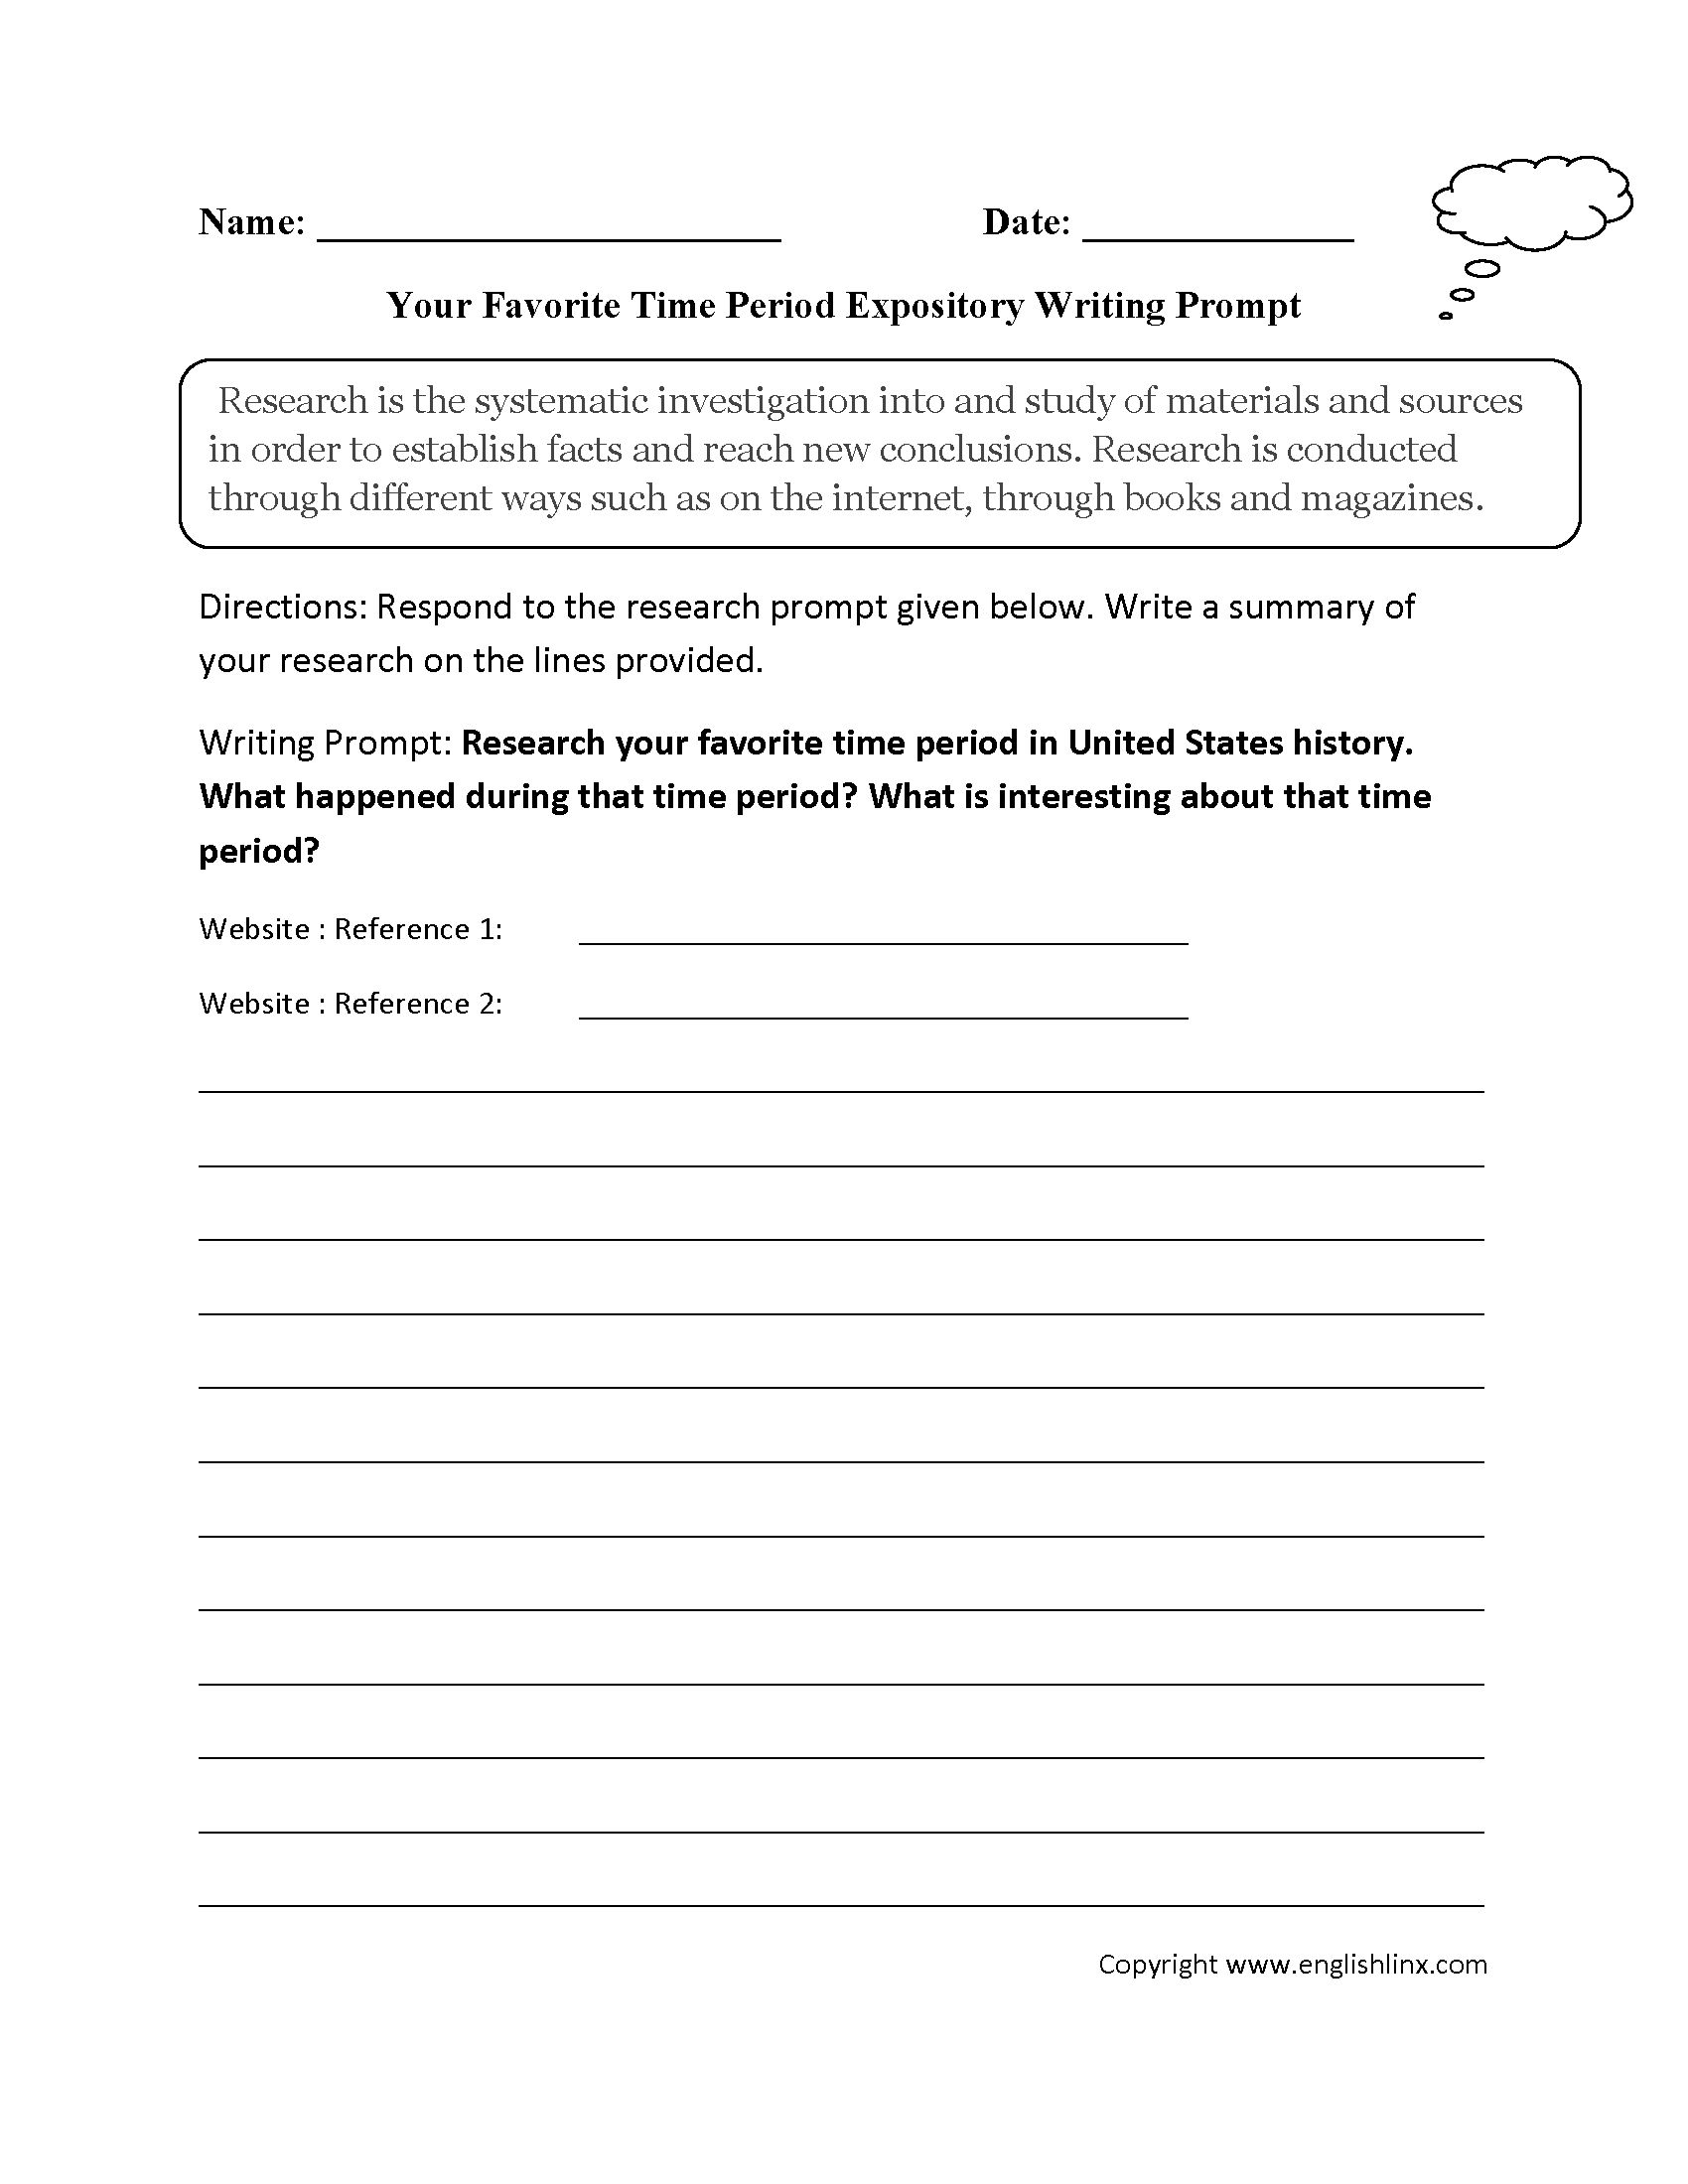 pearson-education-inc-worksheet-answers-db-excel